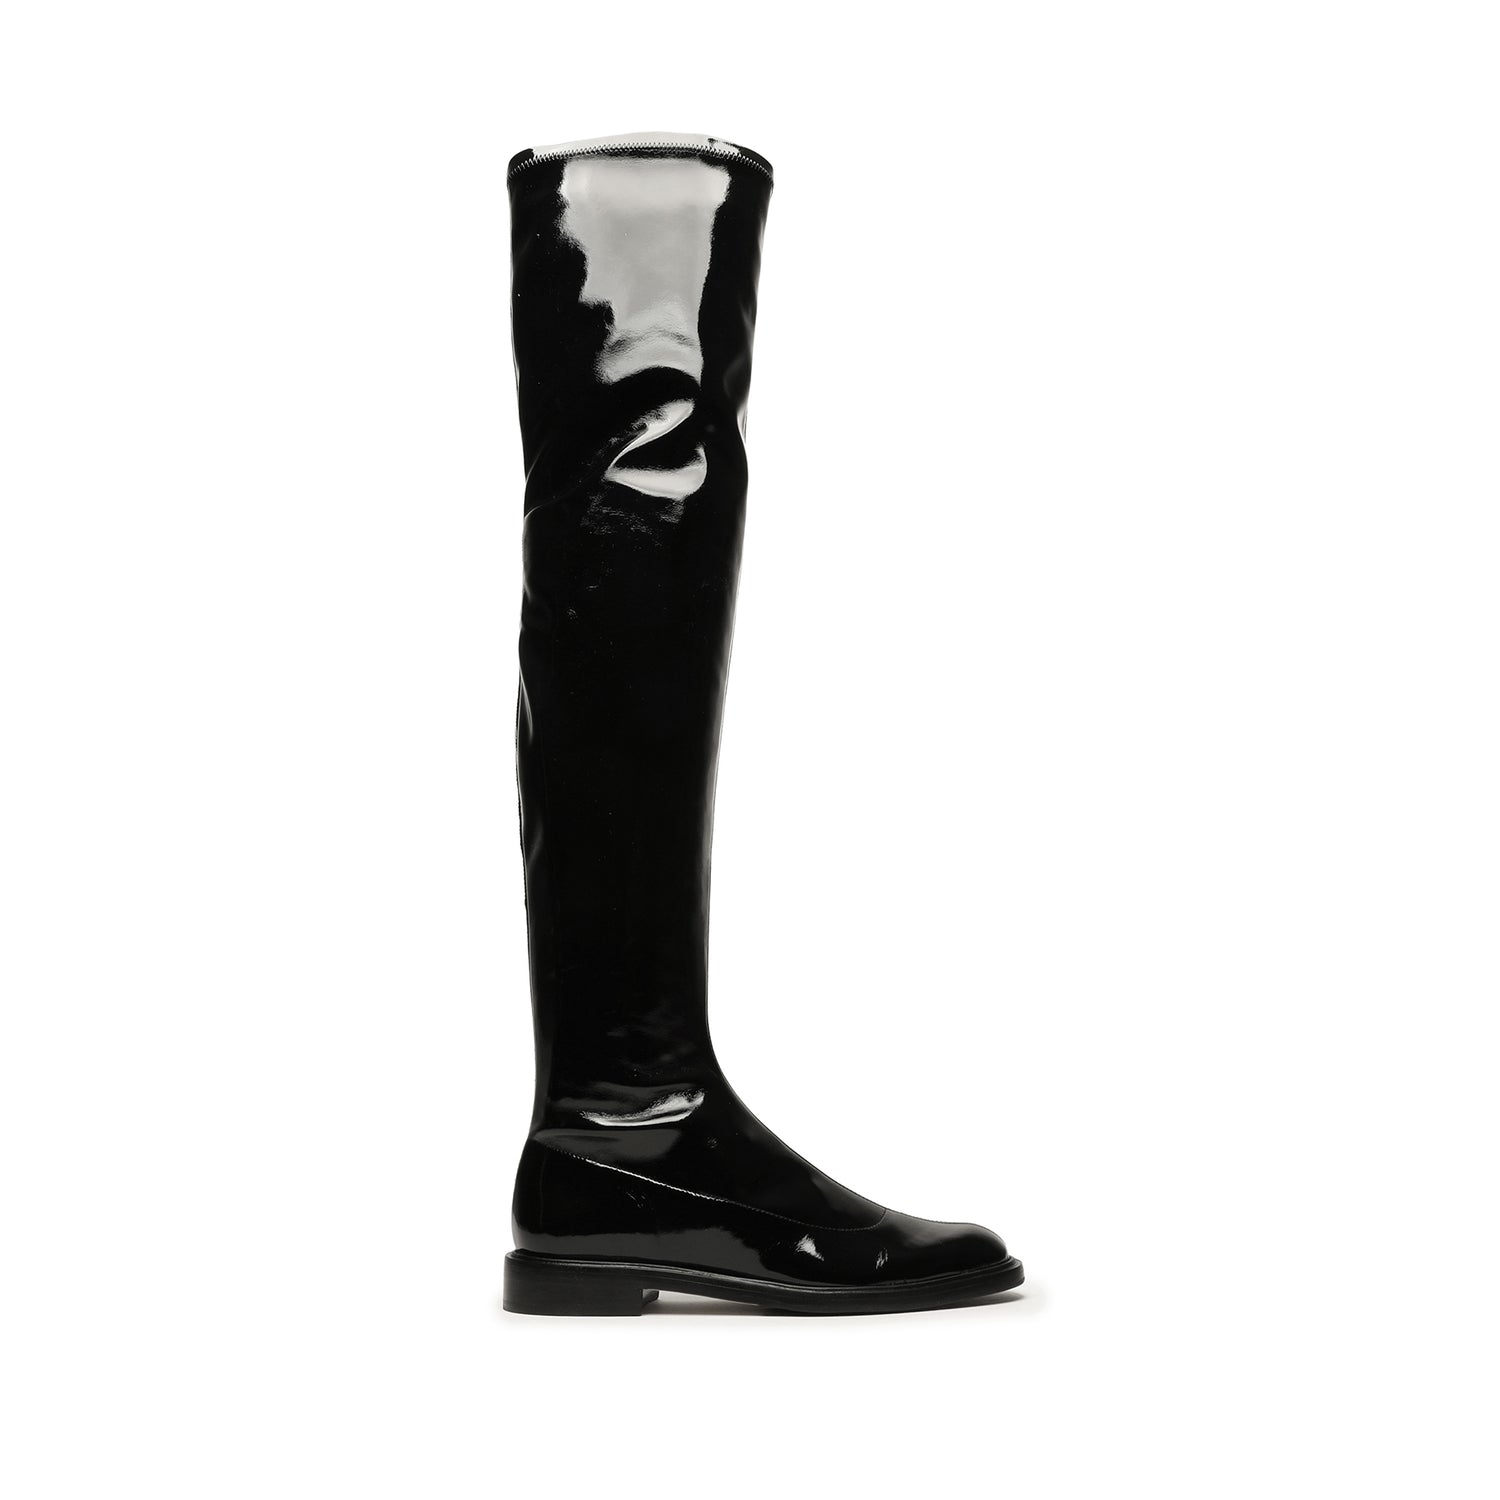 Kaolin Over the Knee Patent Leather  Boot Boots CO 5 Black Patent Leather - Schutz Shoes